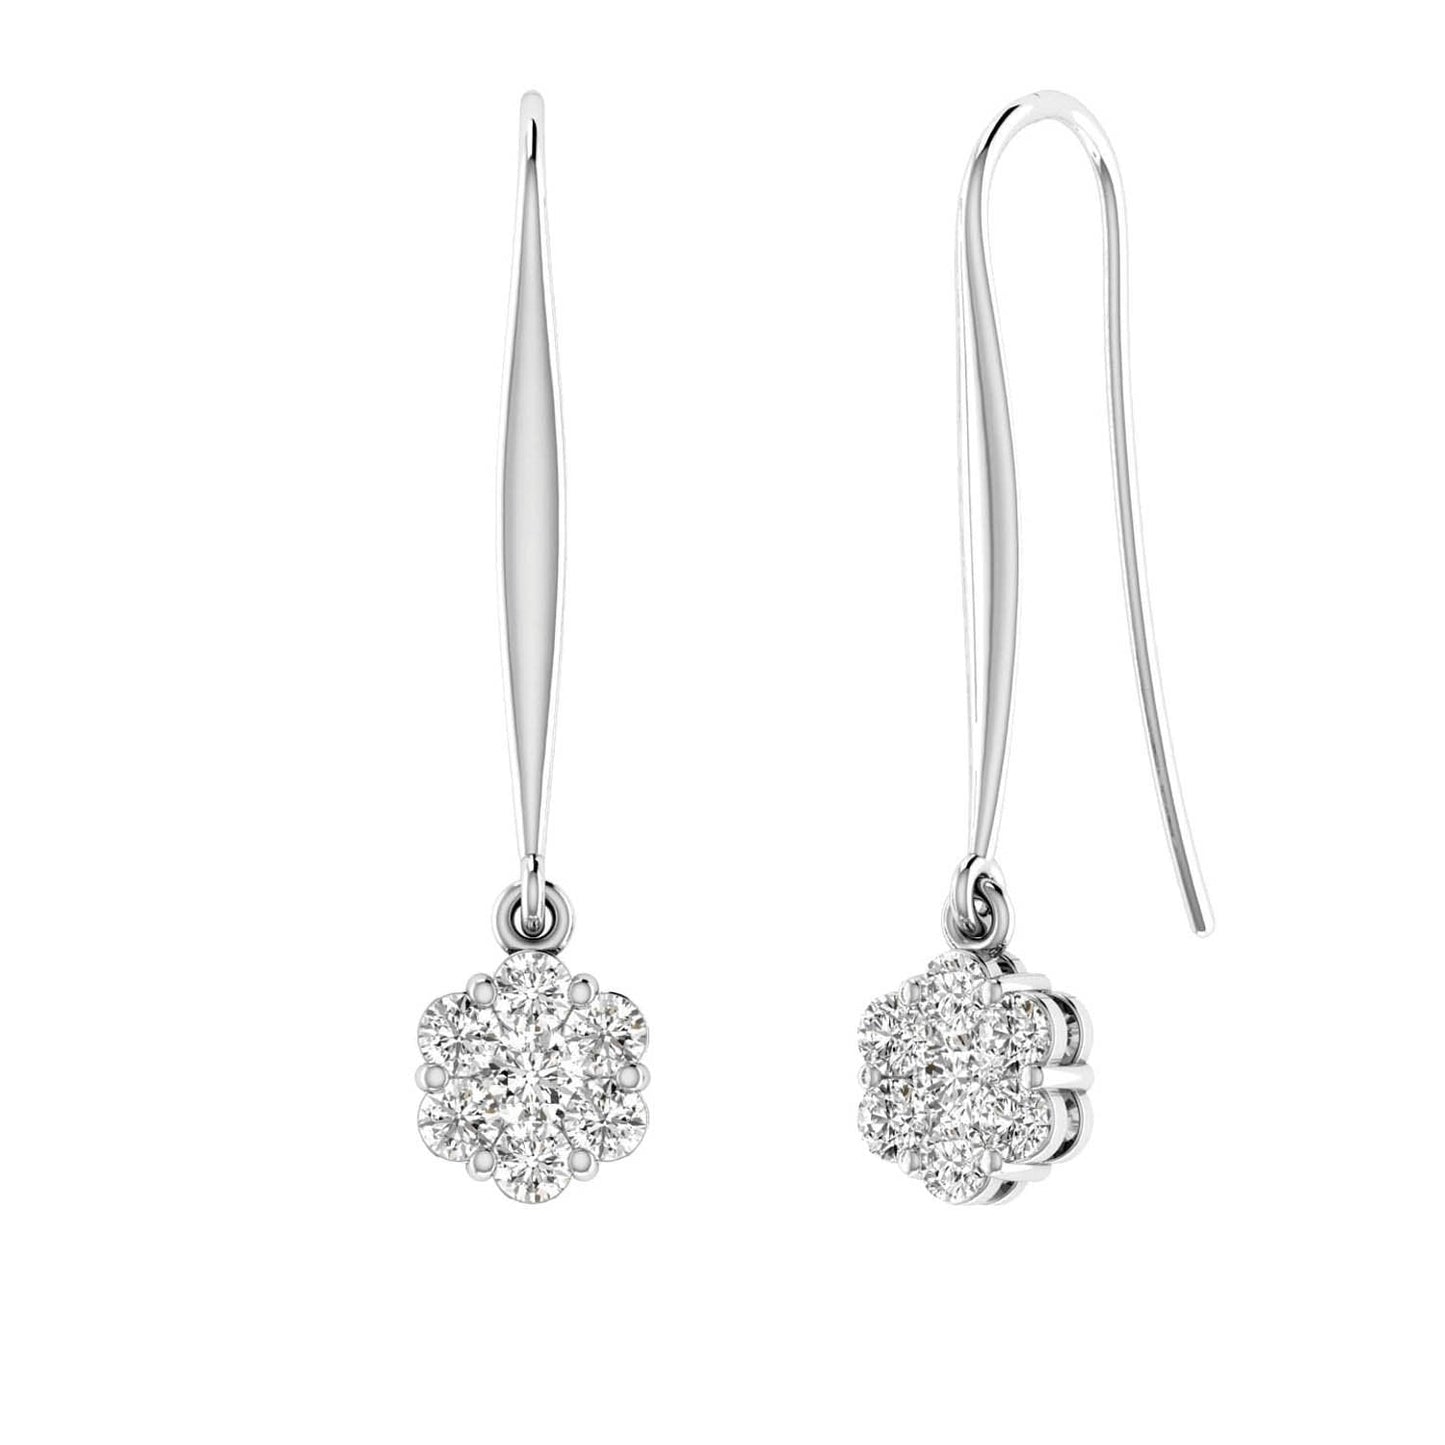 Cluster Hook Diamond Earrings with 1.00ct Diamonds in 9K White Gold - 9WSH100GH